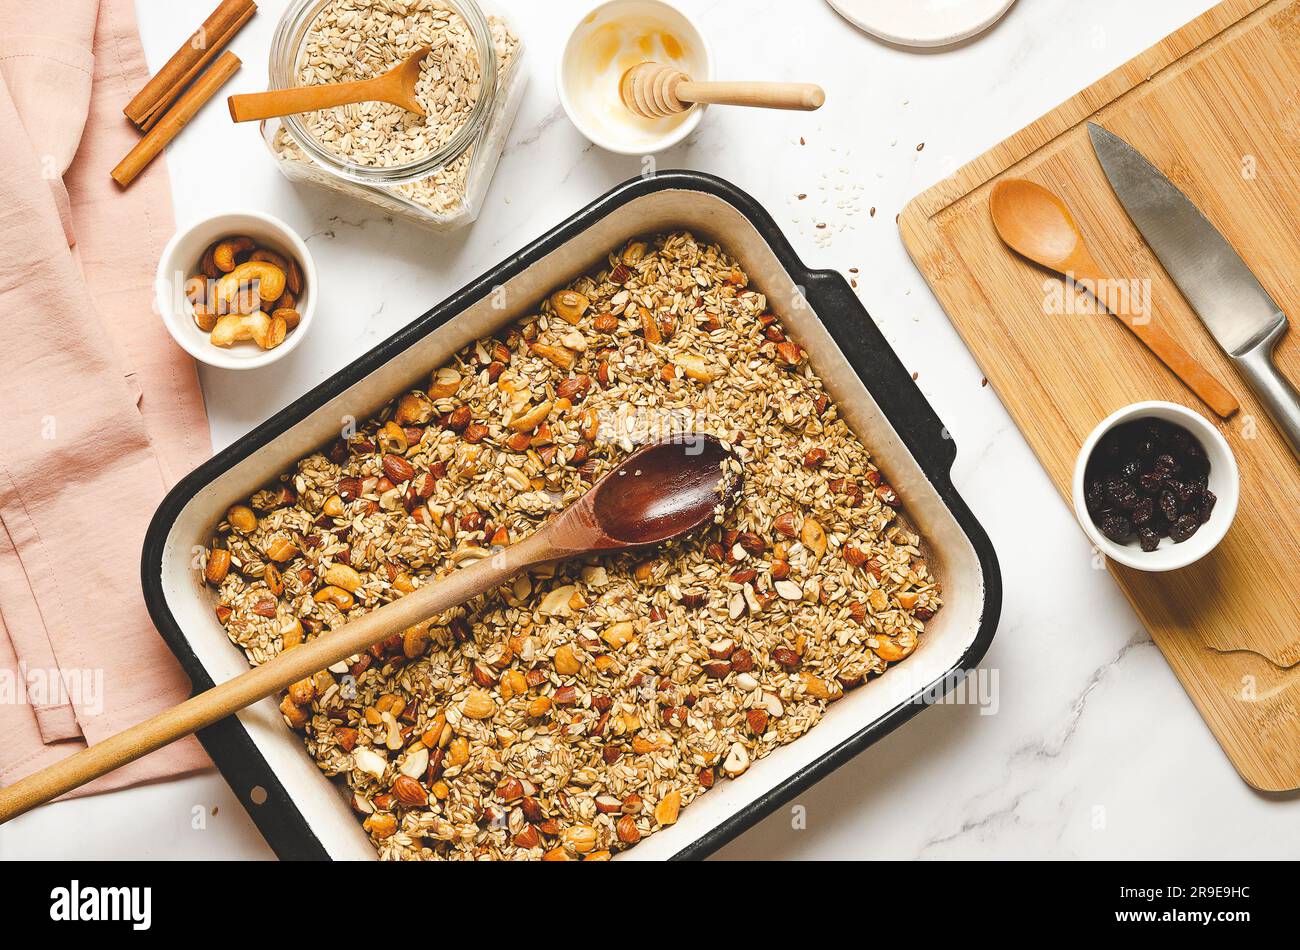 Homemade granola with nuts, dried cranberries and honey in a baking pan on a white marbled background, top view. Stock Photo